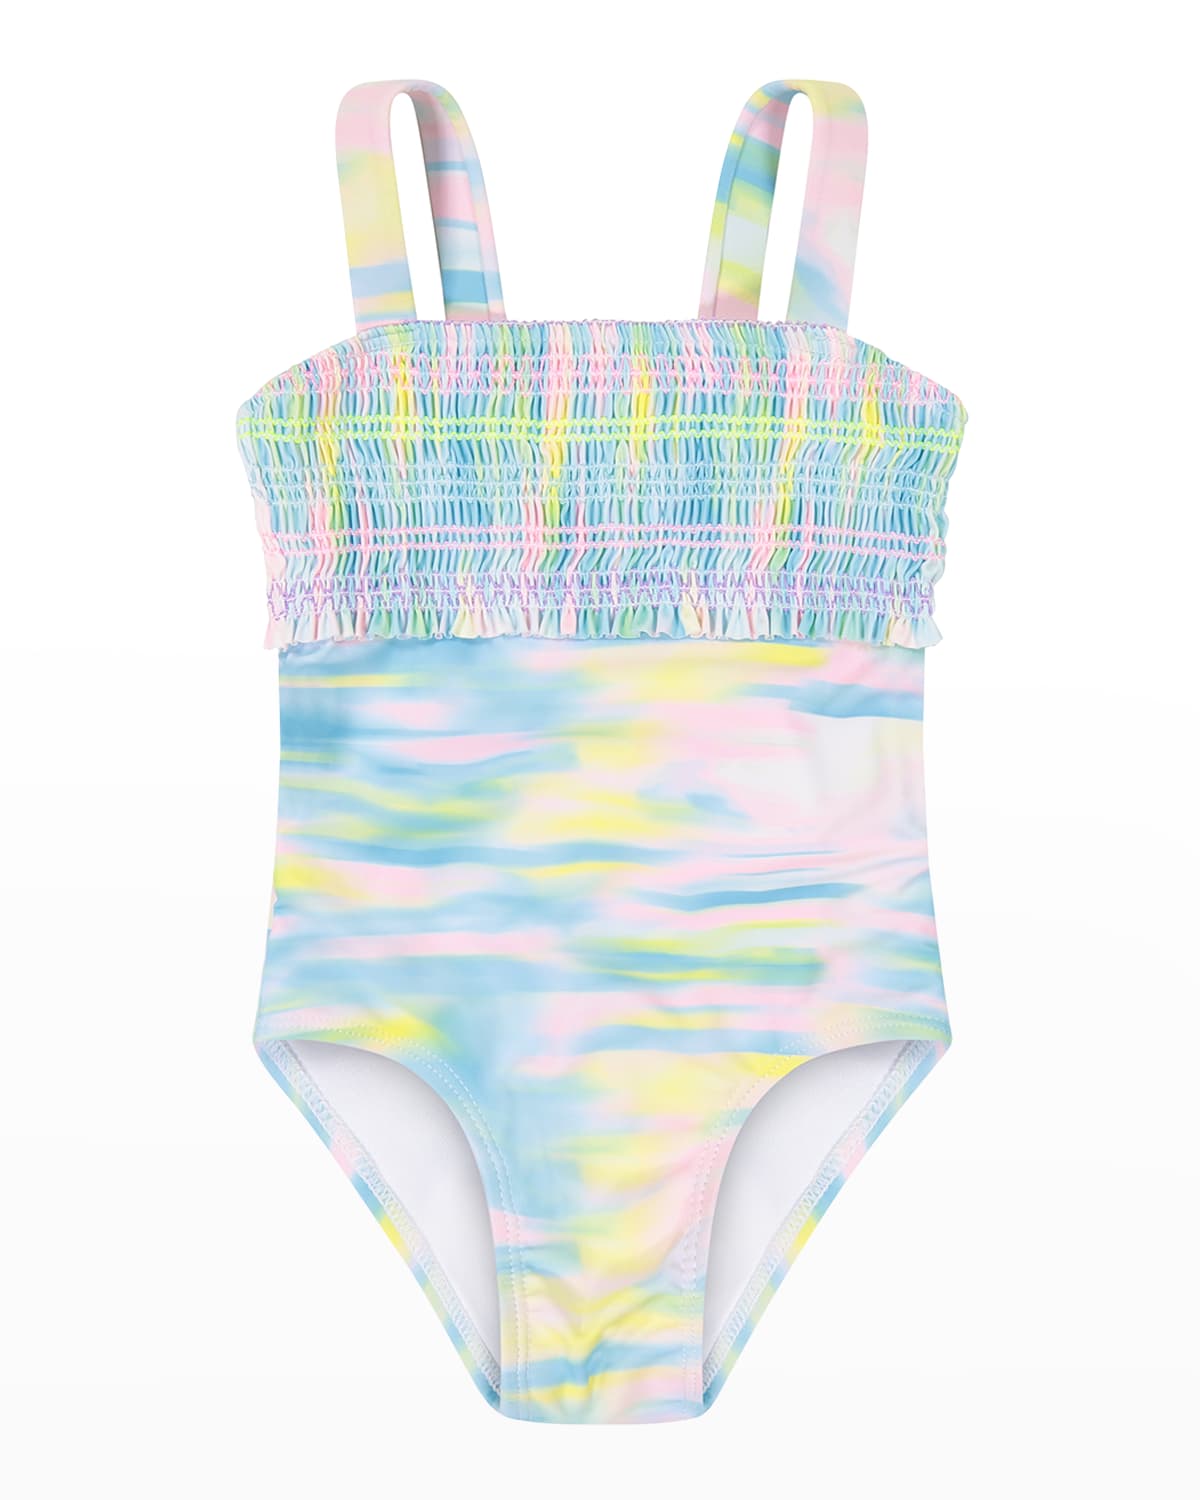 ANDY & EVAN GIRL'S ONE-PIECE SMOCK PRINTED SWIMSUIT